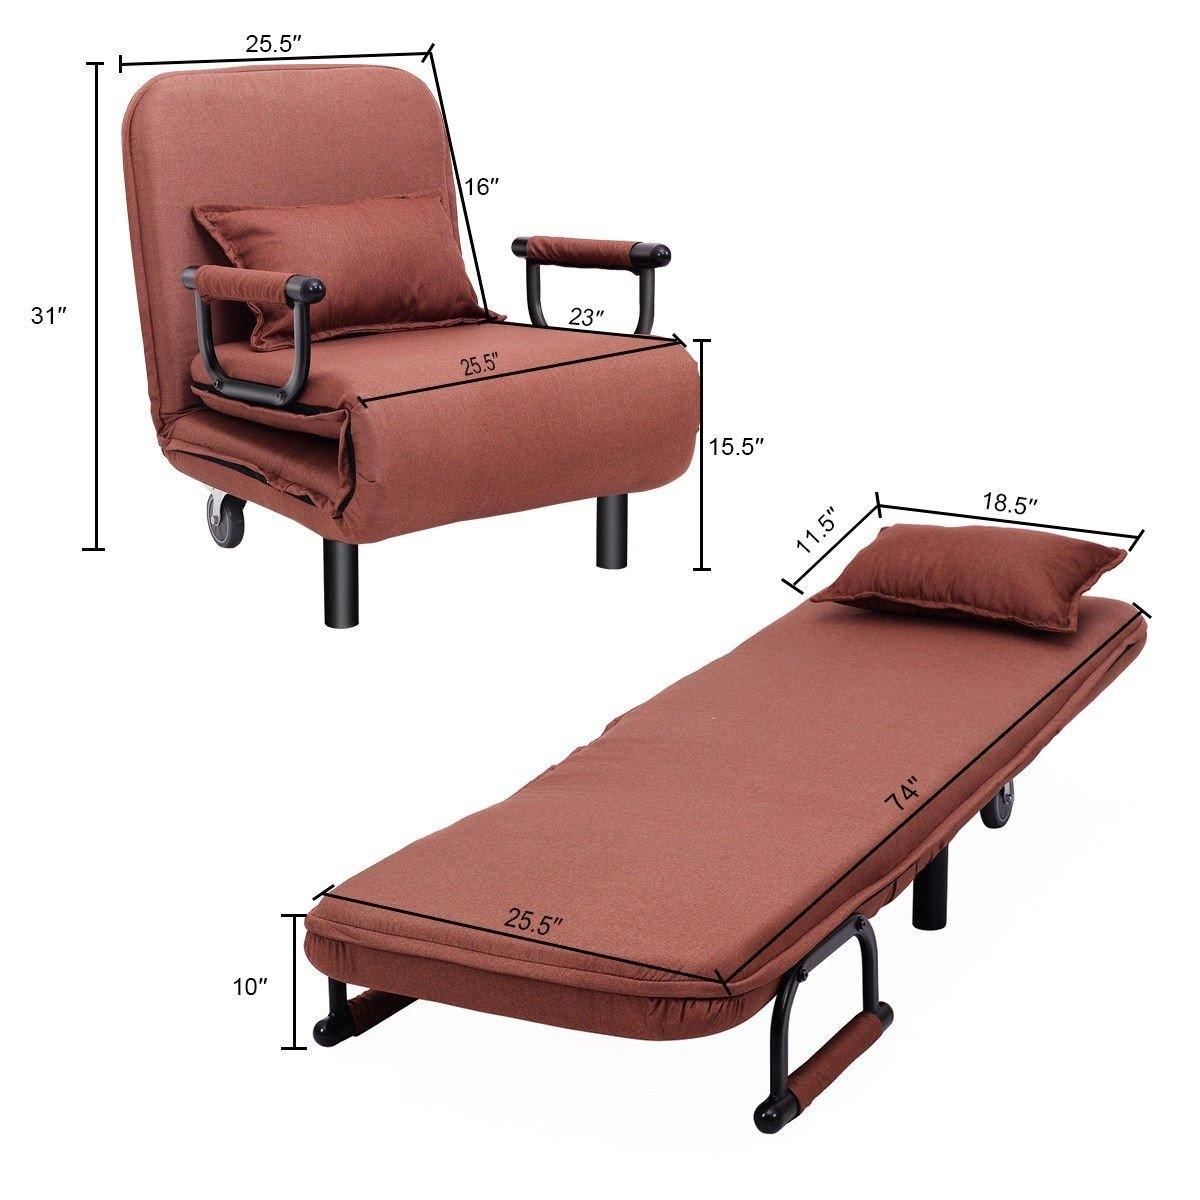 26.5" Folding Arm Chair  can Convertible Sofa Bed